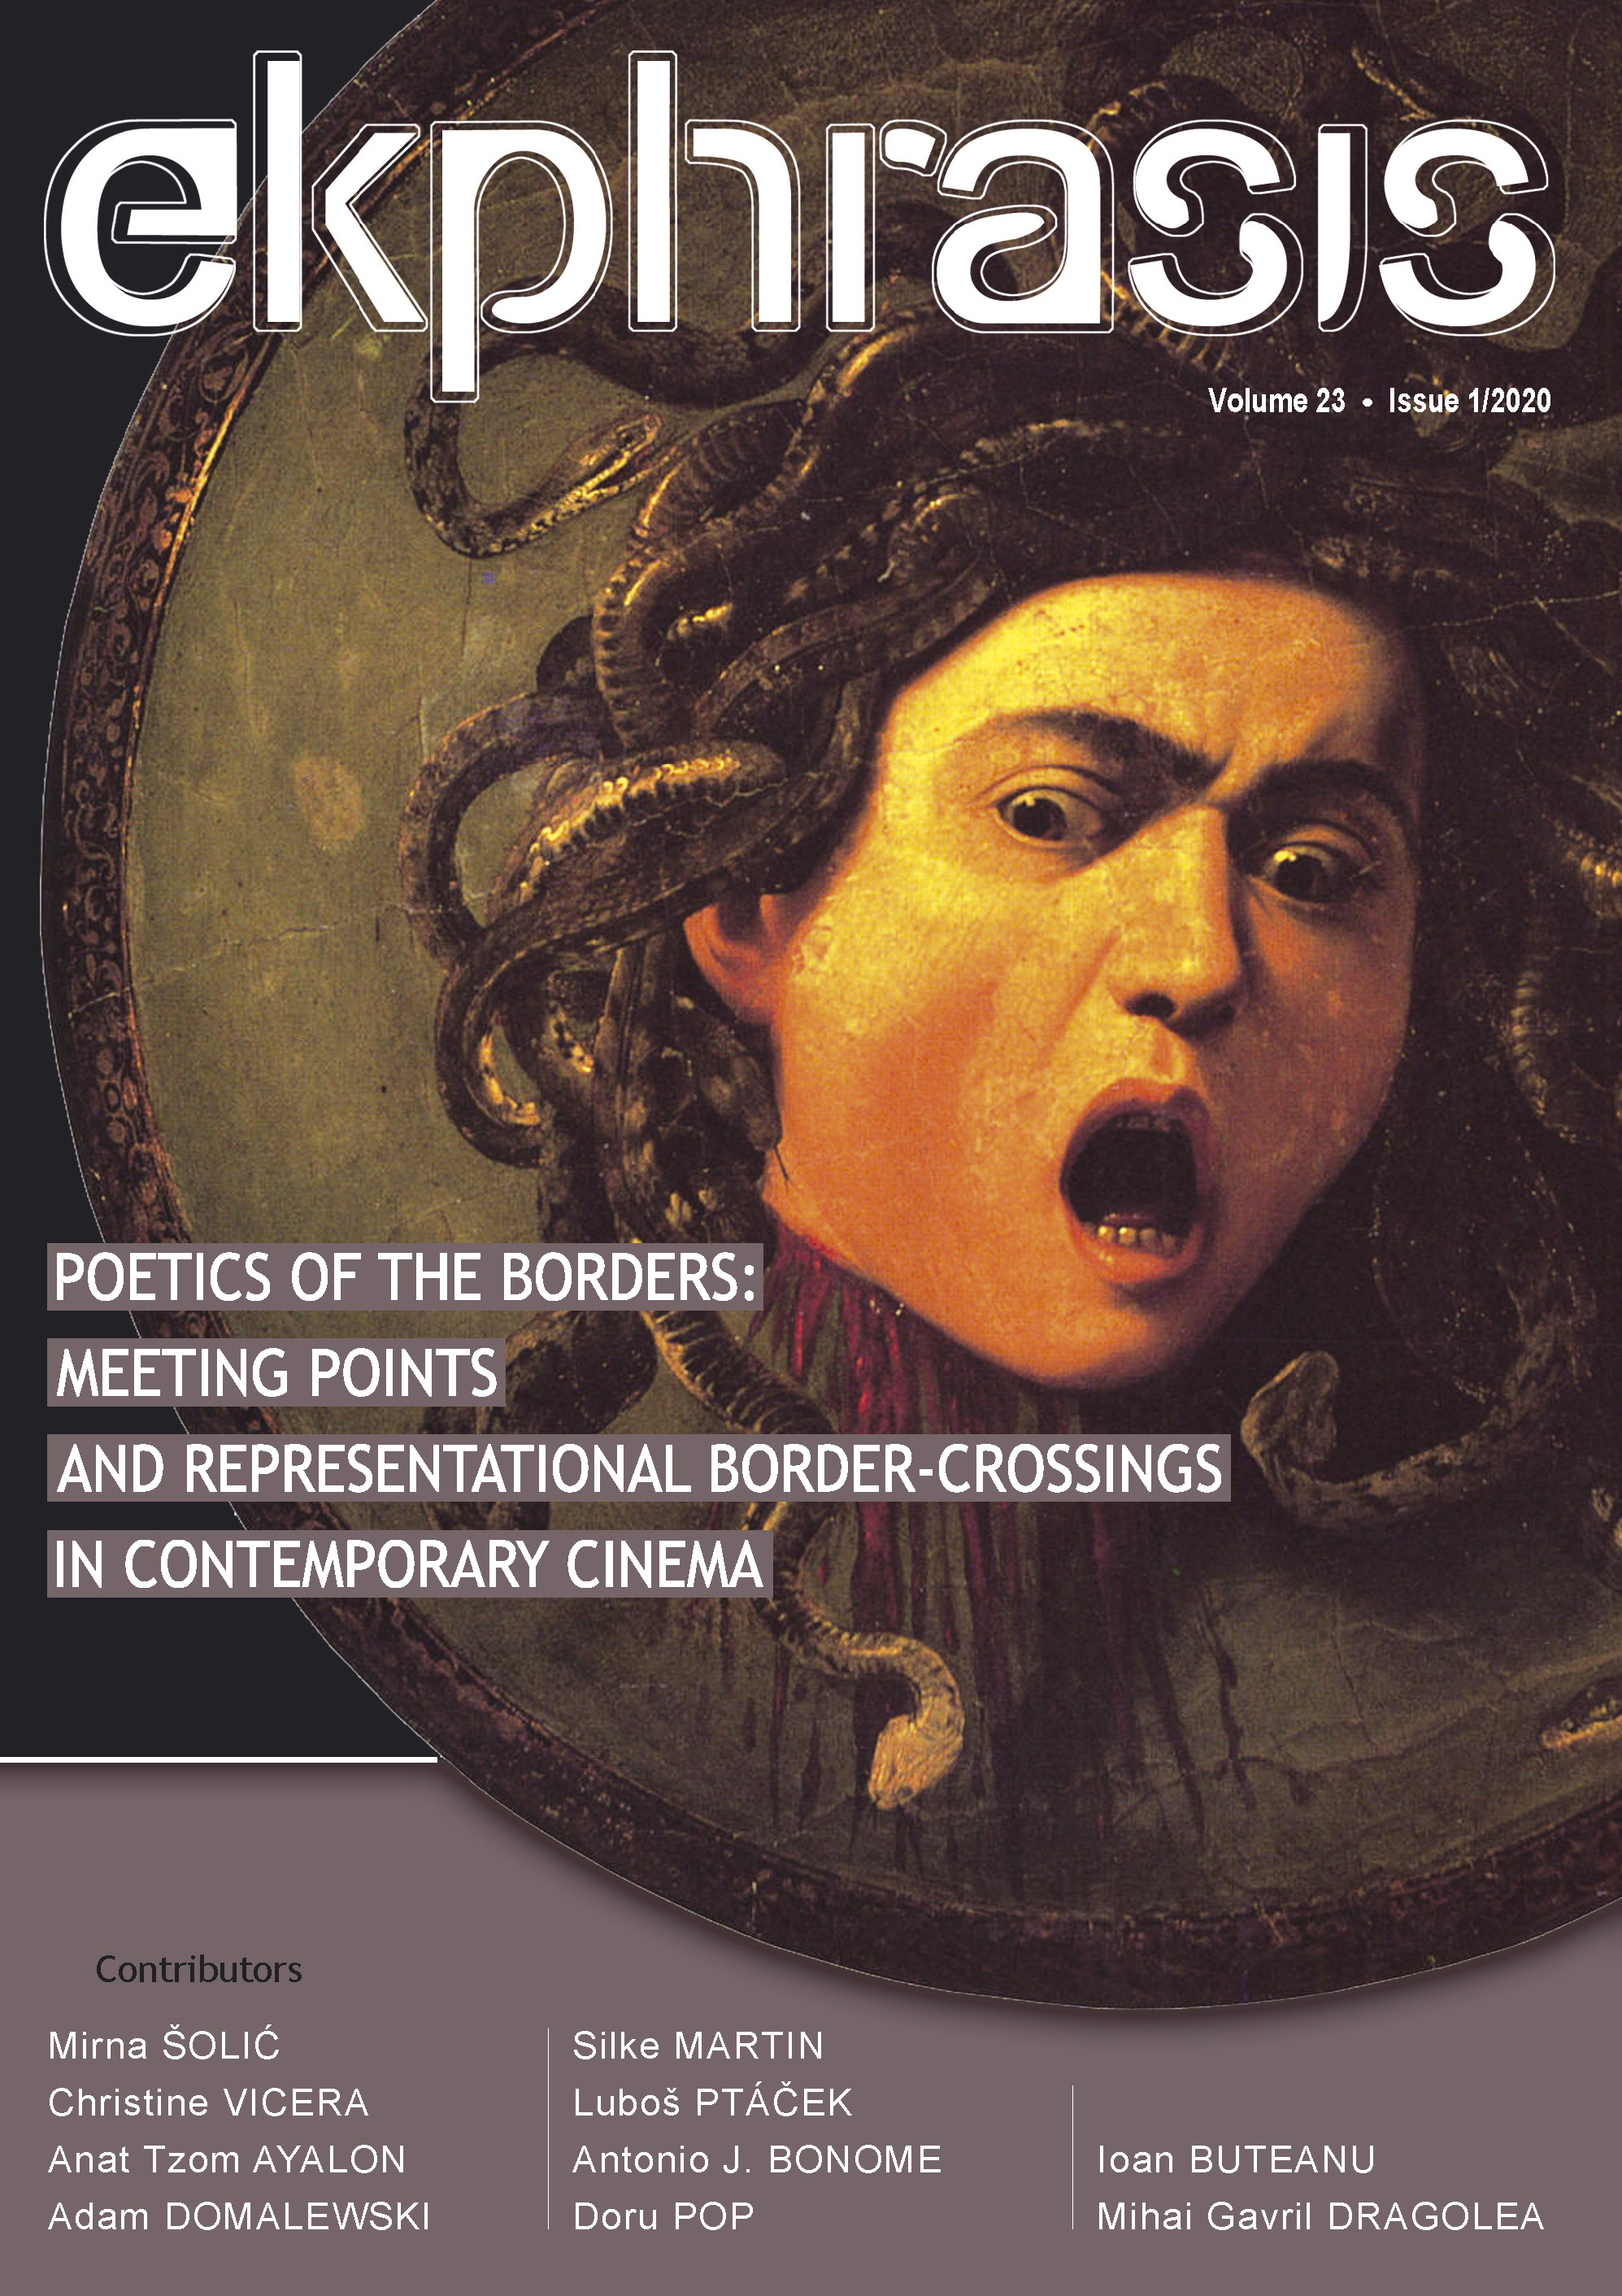 Poetics of the Borders: Meeting Points and Representational Border-Crossings in Contemporary Central and Eastern European Cinema